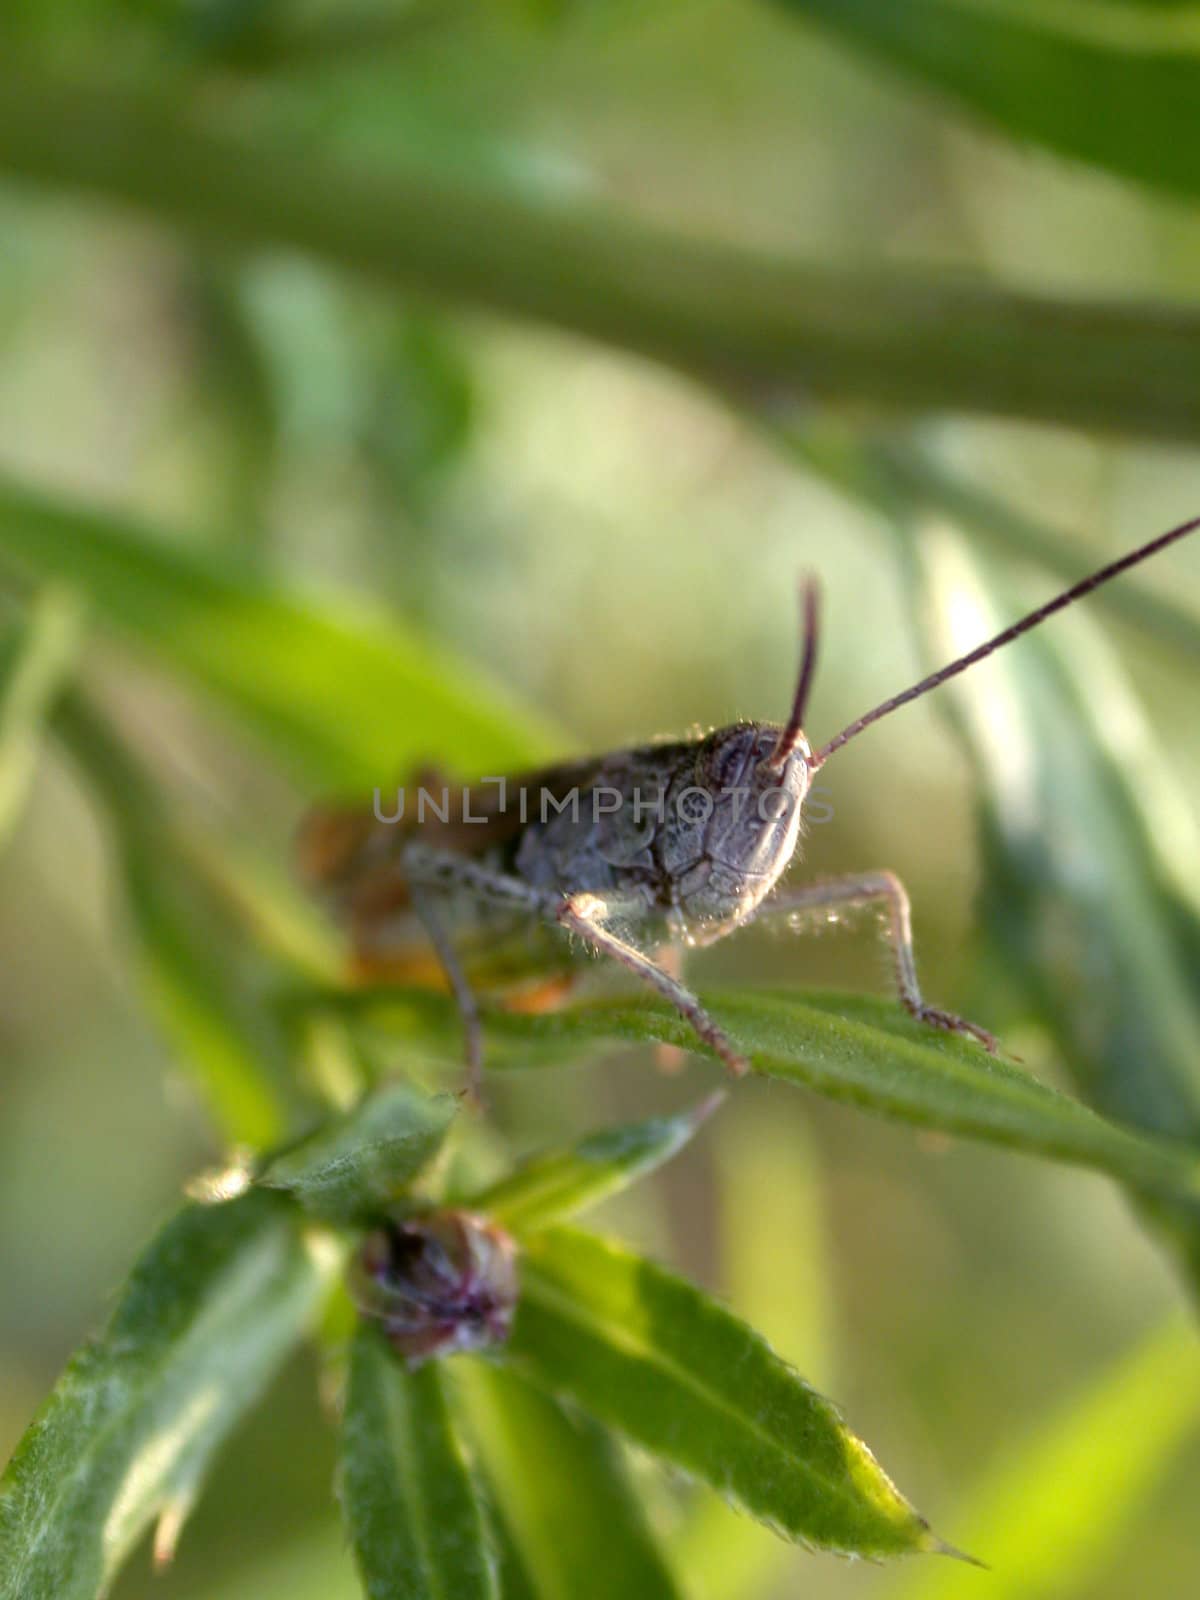 The grasshopper on the plant.